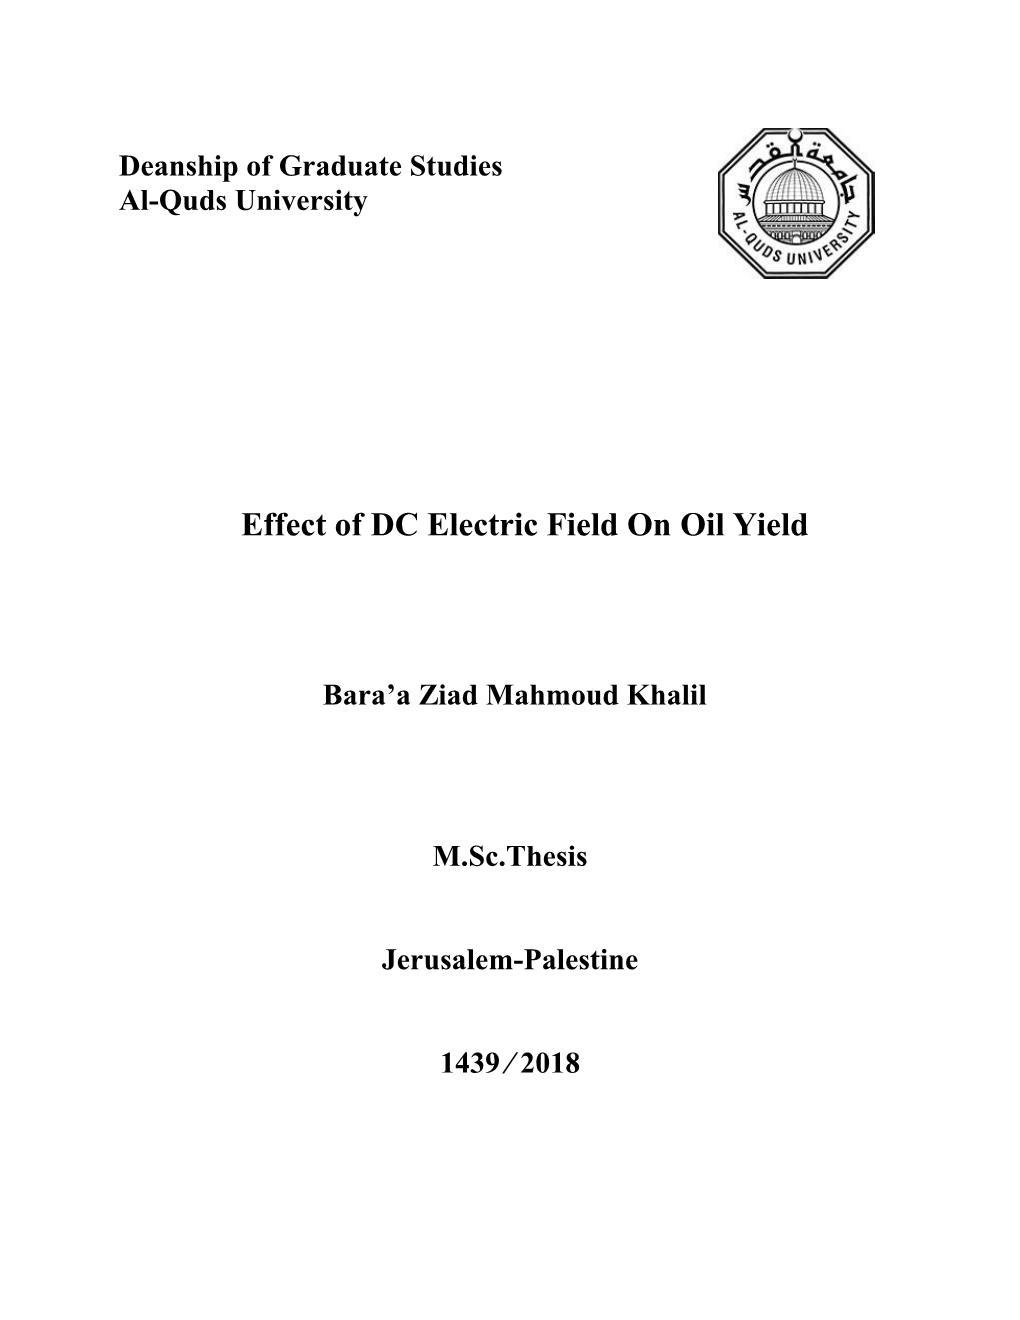 Effect of DC Electric Field on Oil Yield